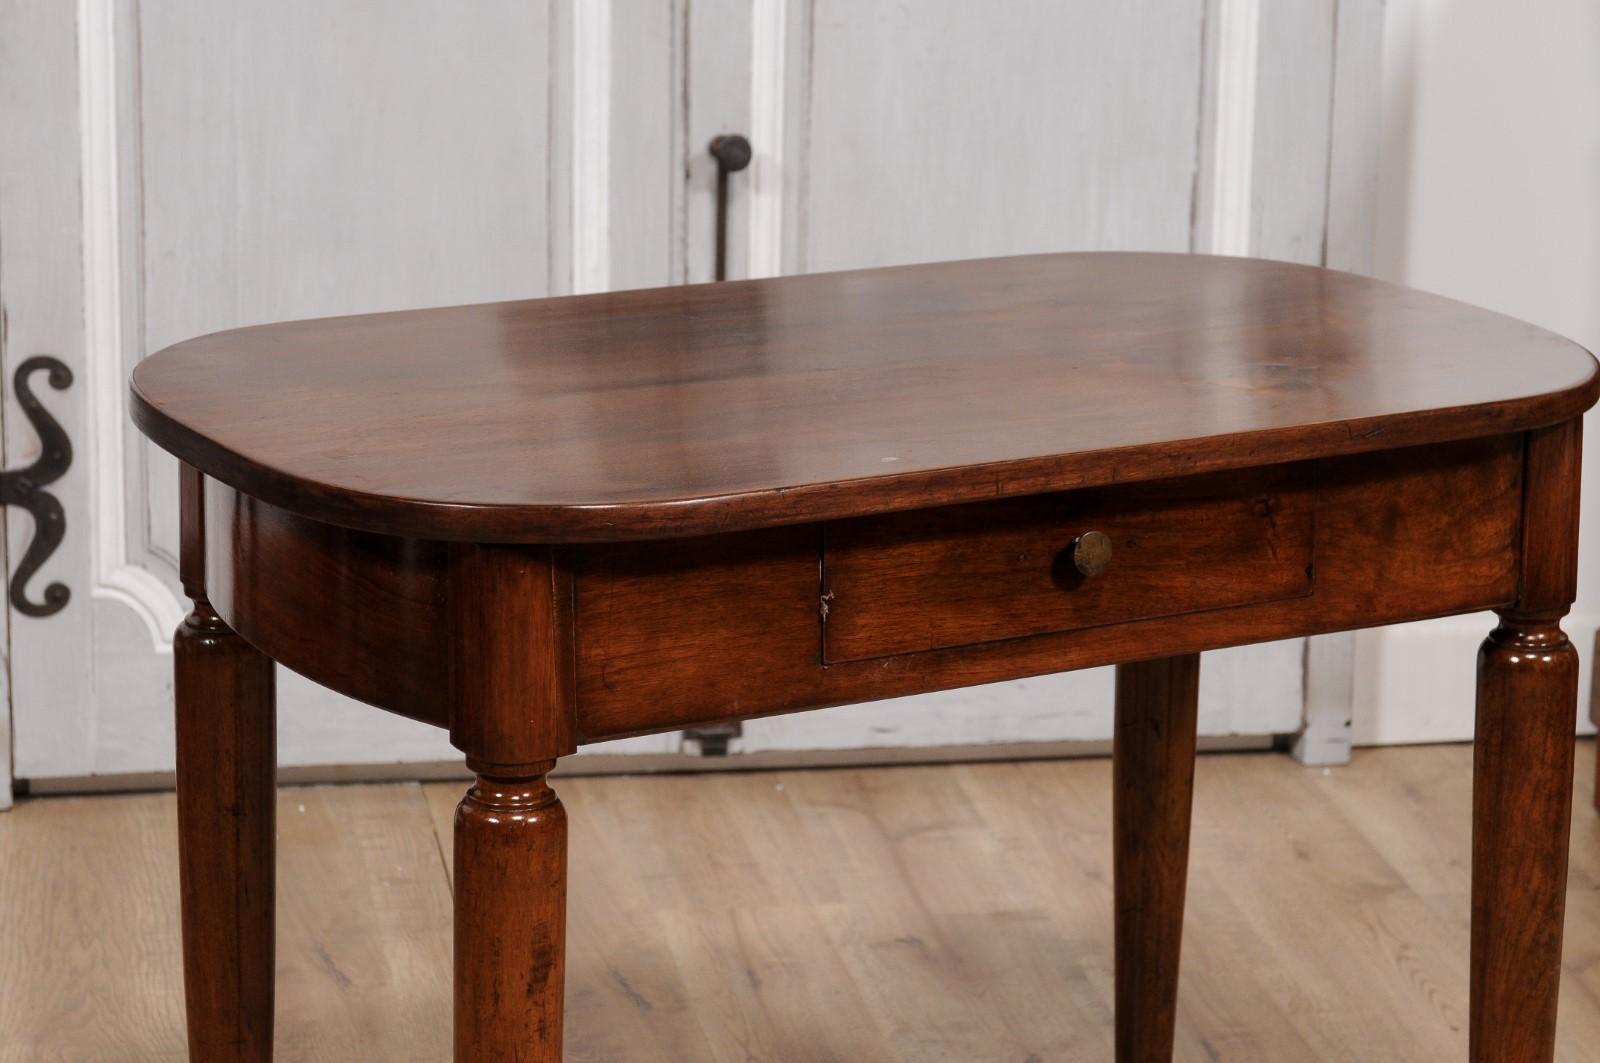 19th Century Italian Walnut 1890s Side Table with Oval Top, One Drawer and Cylindrical Legs For Sale